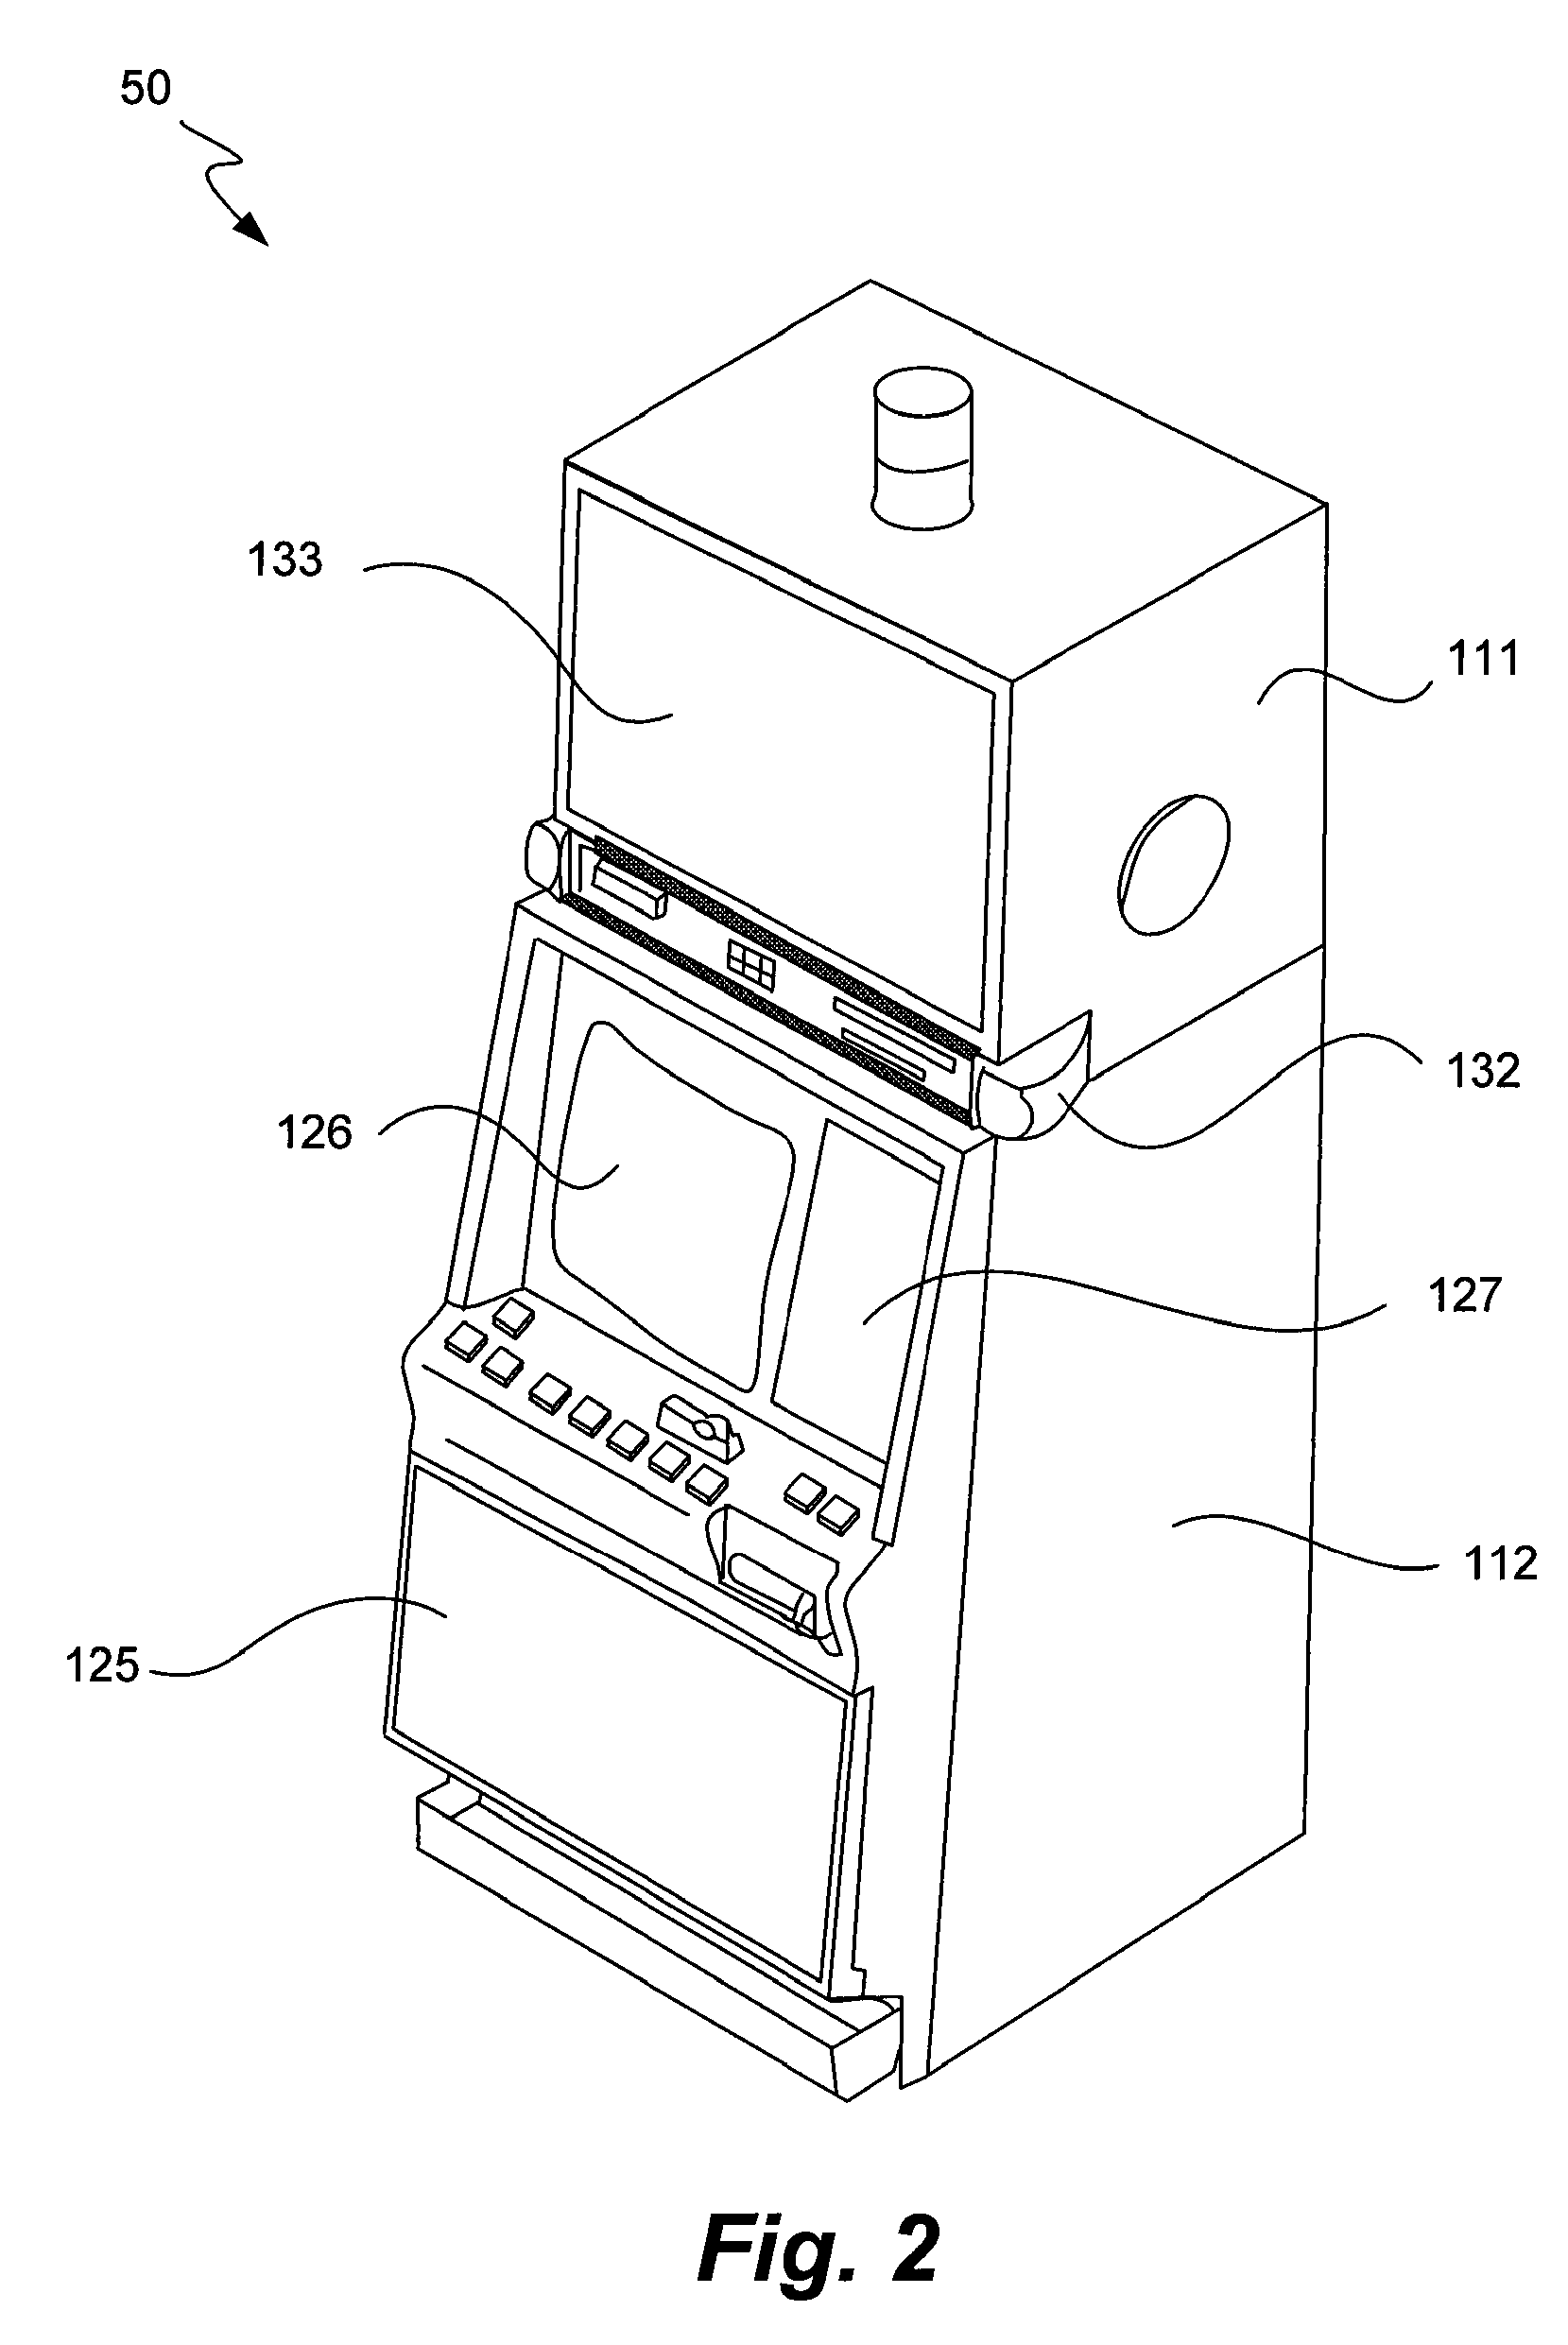 Casino Display methods and devices